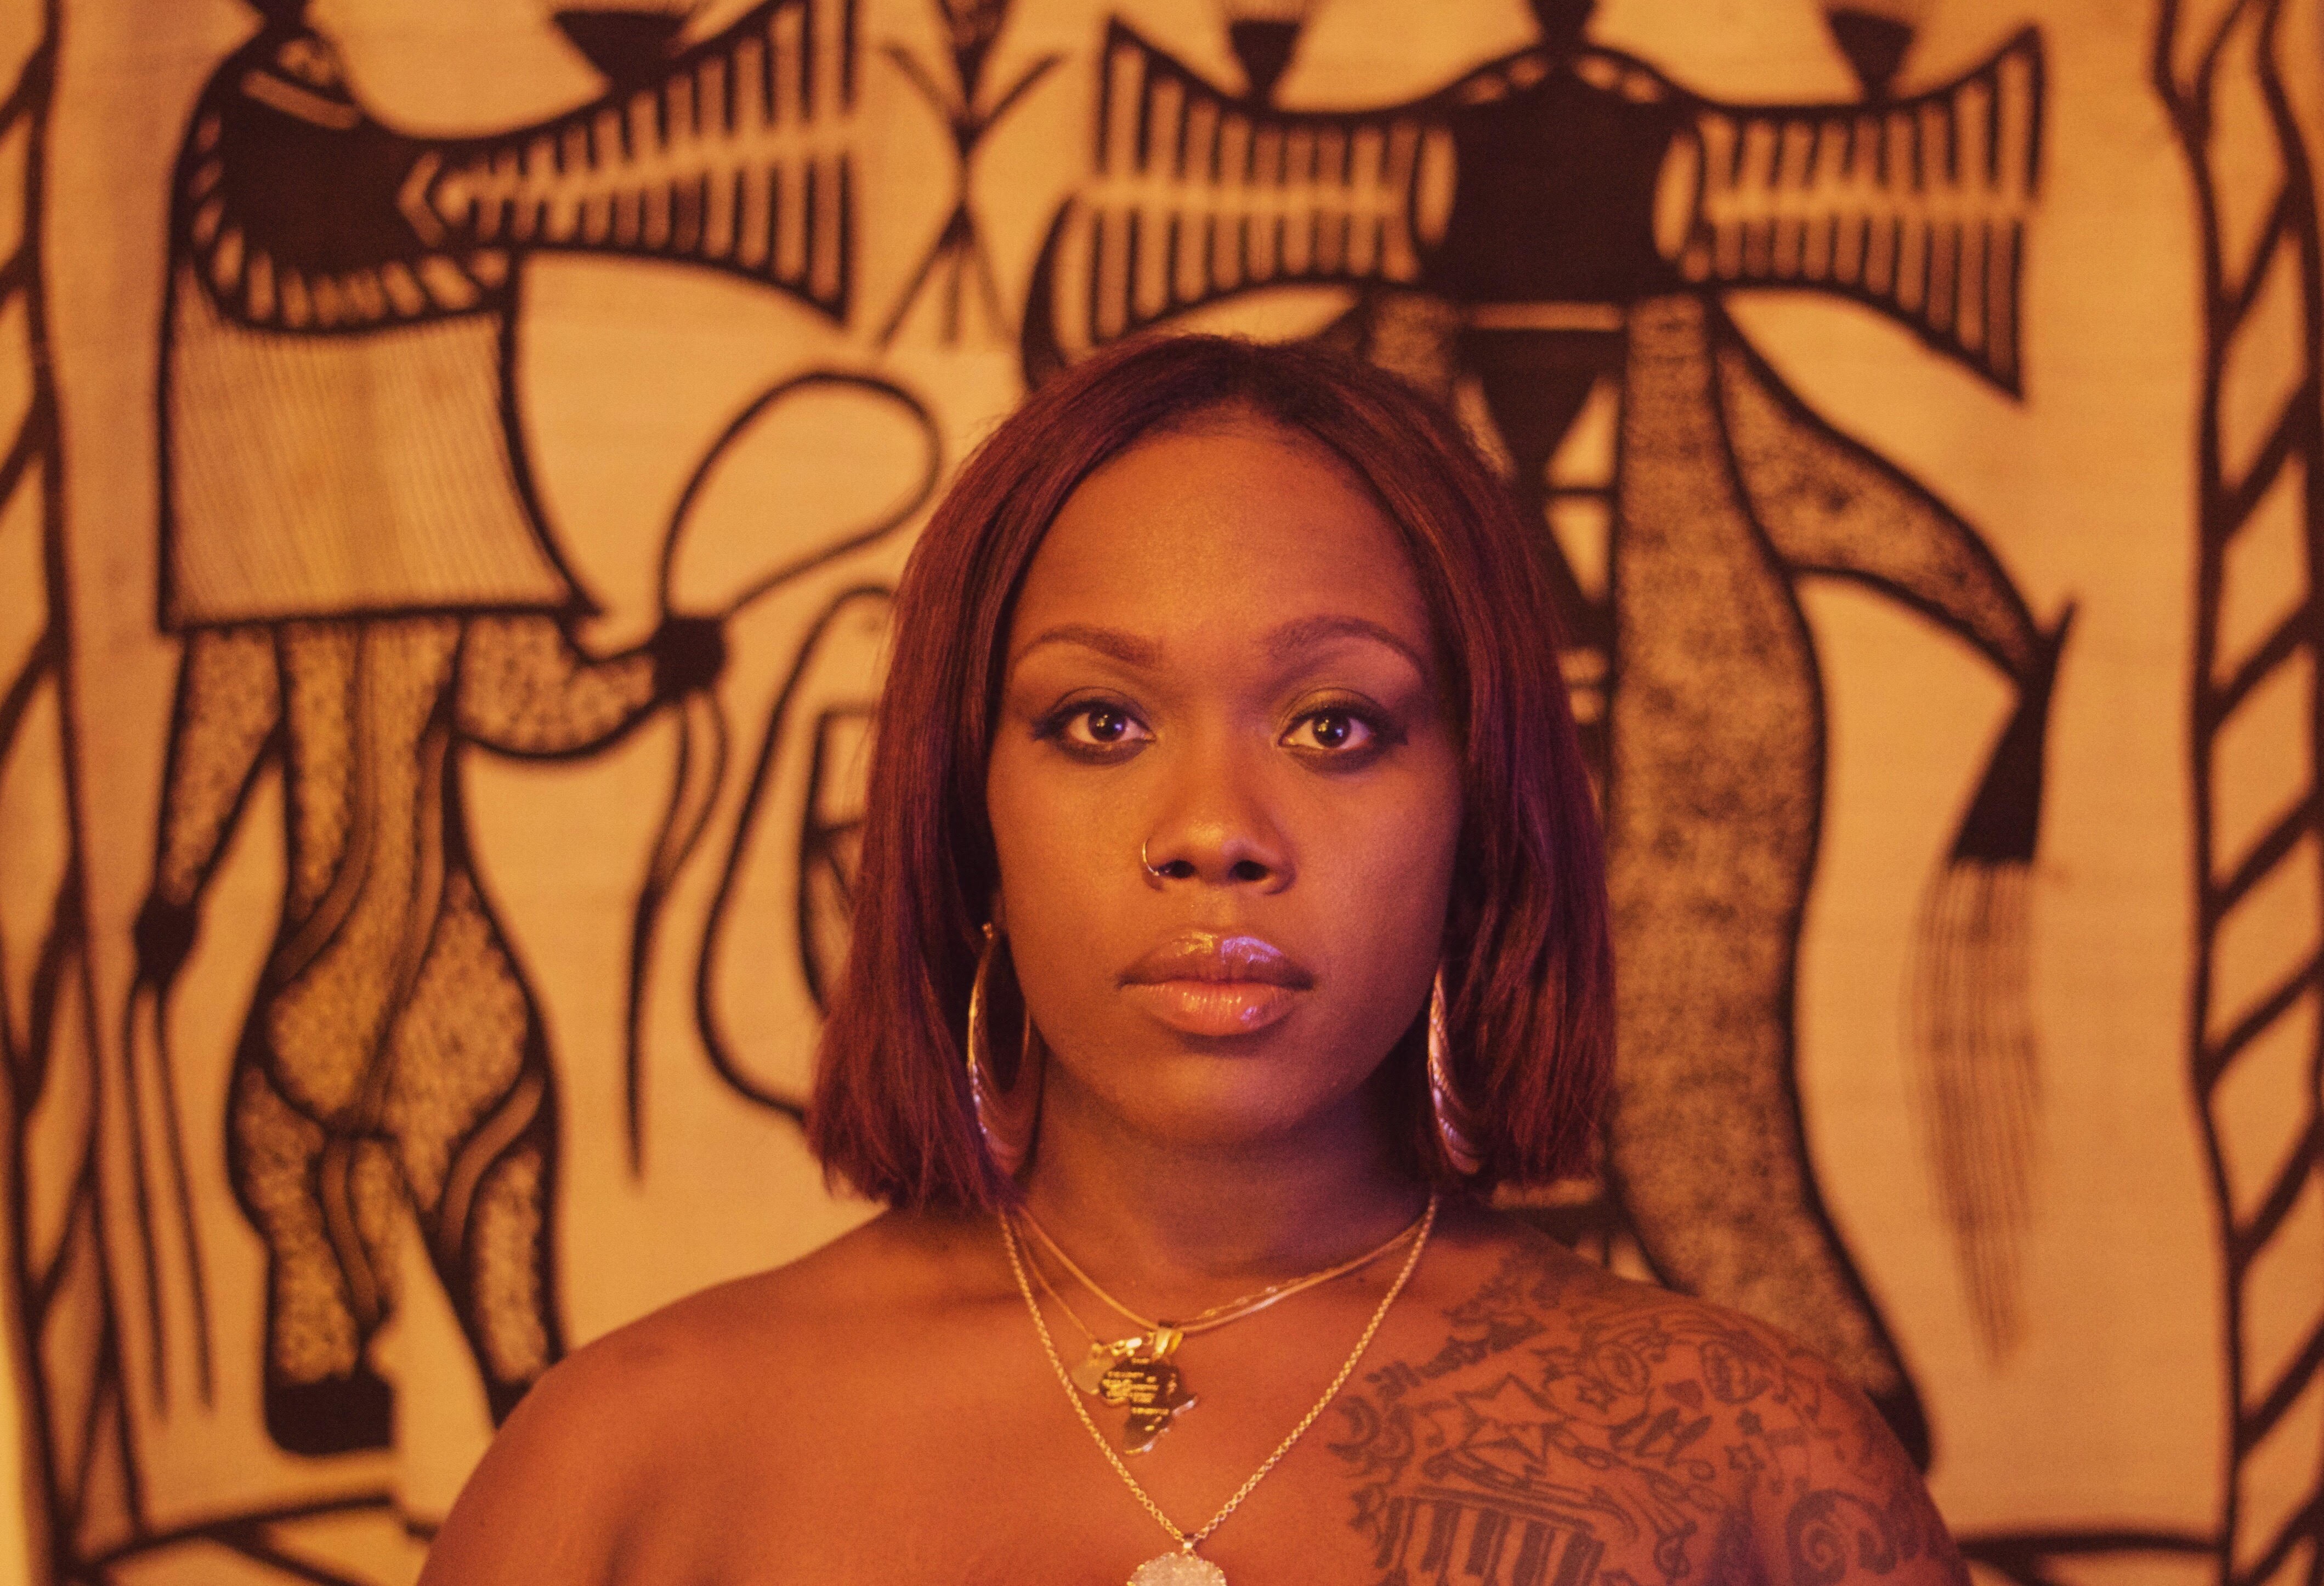 ILL CAMILLE – March 2019